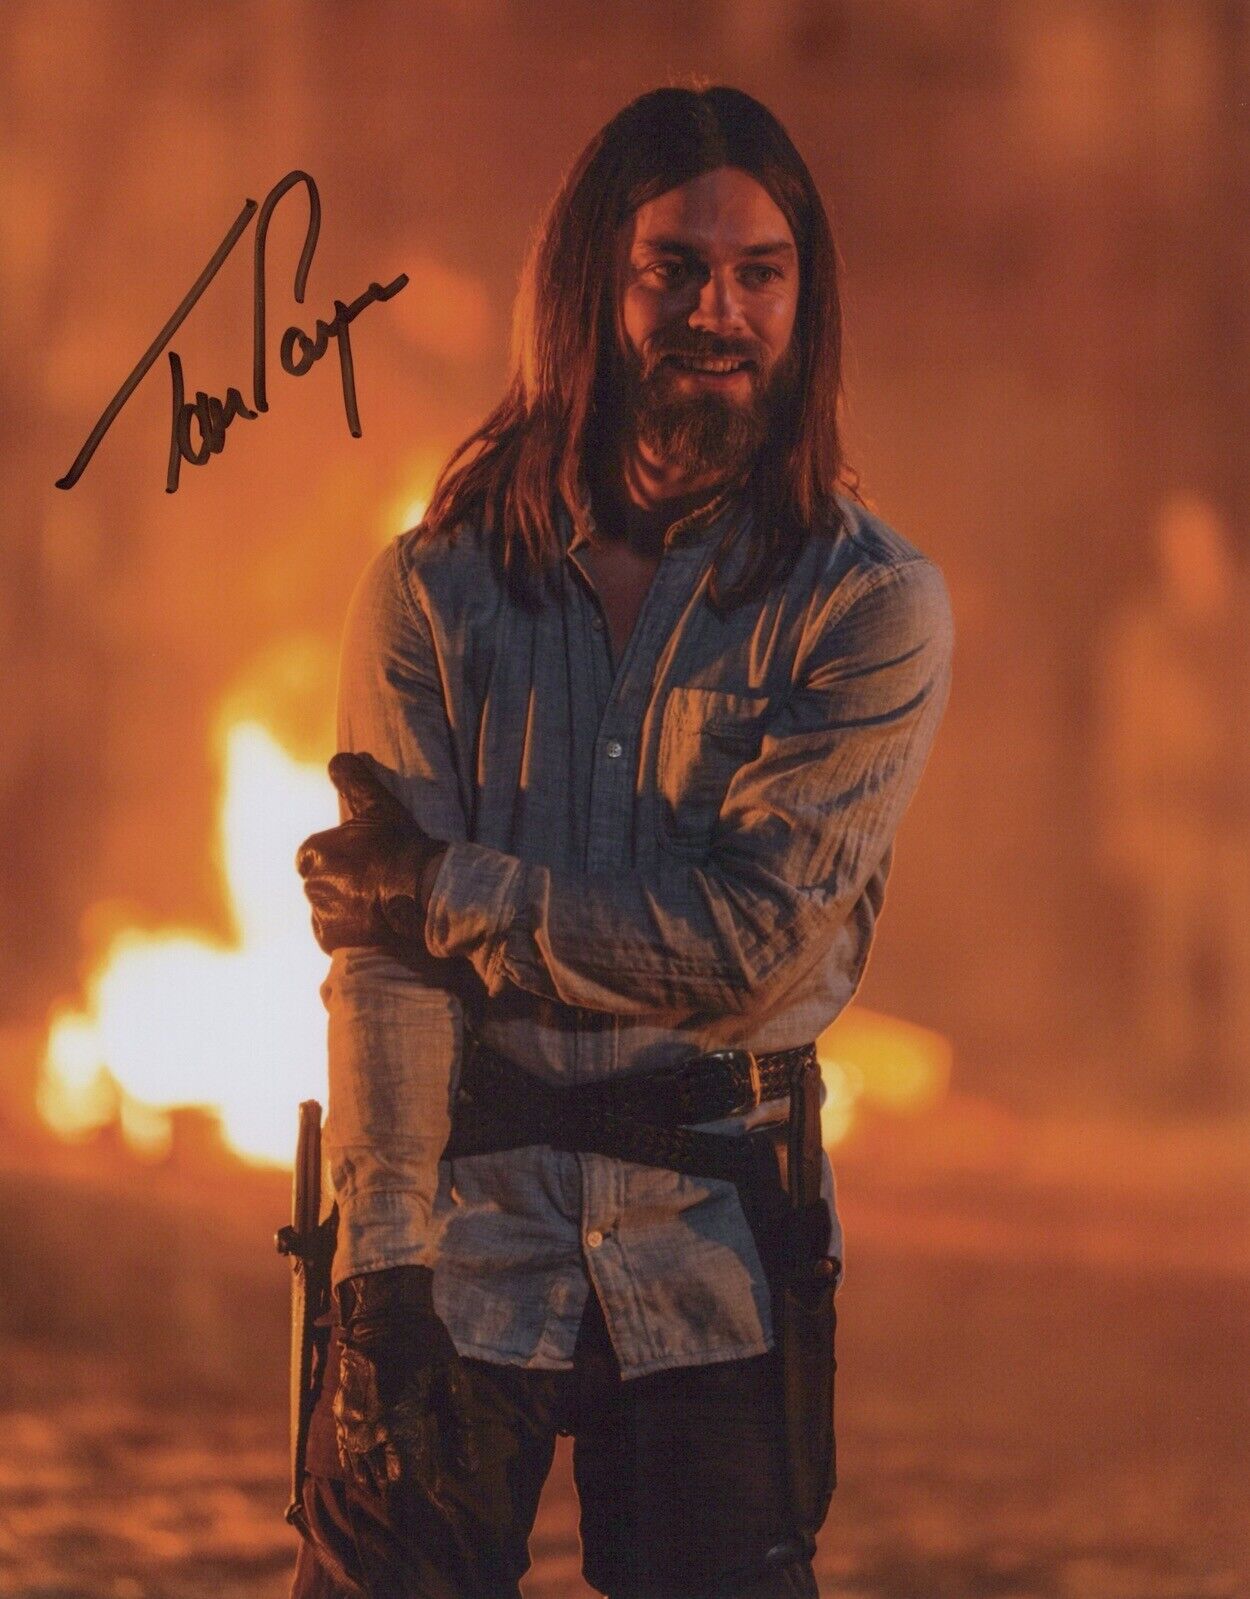 The Walking Dead 8x10 TV series scene Photo Poster painting signed by Tom Payne